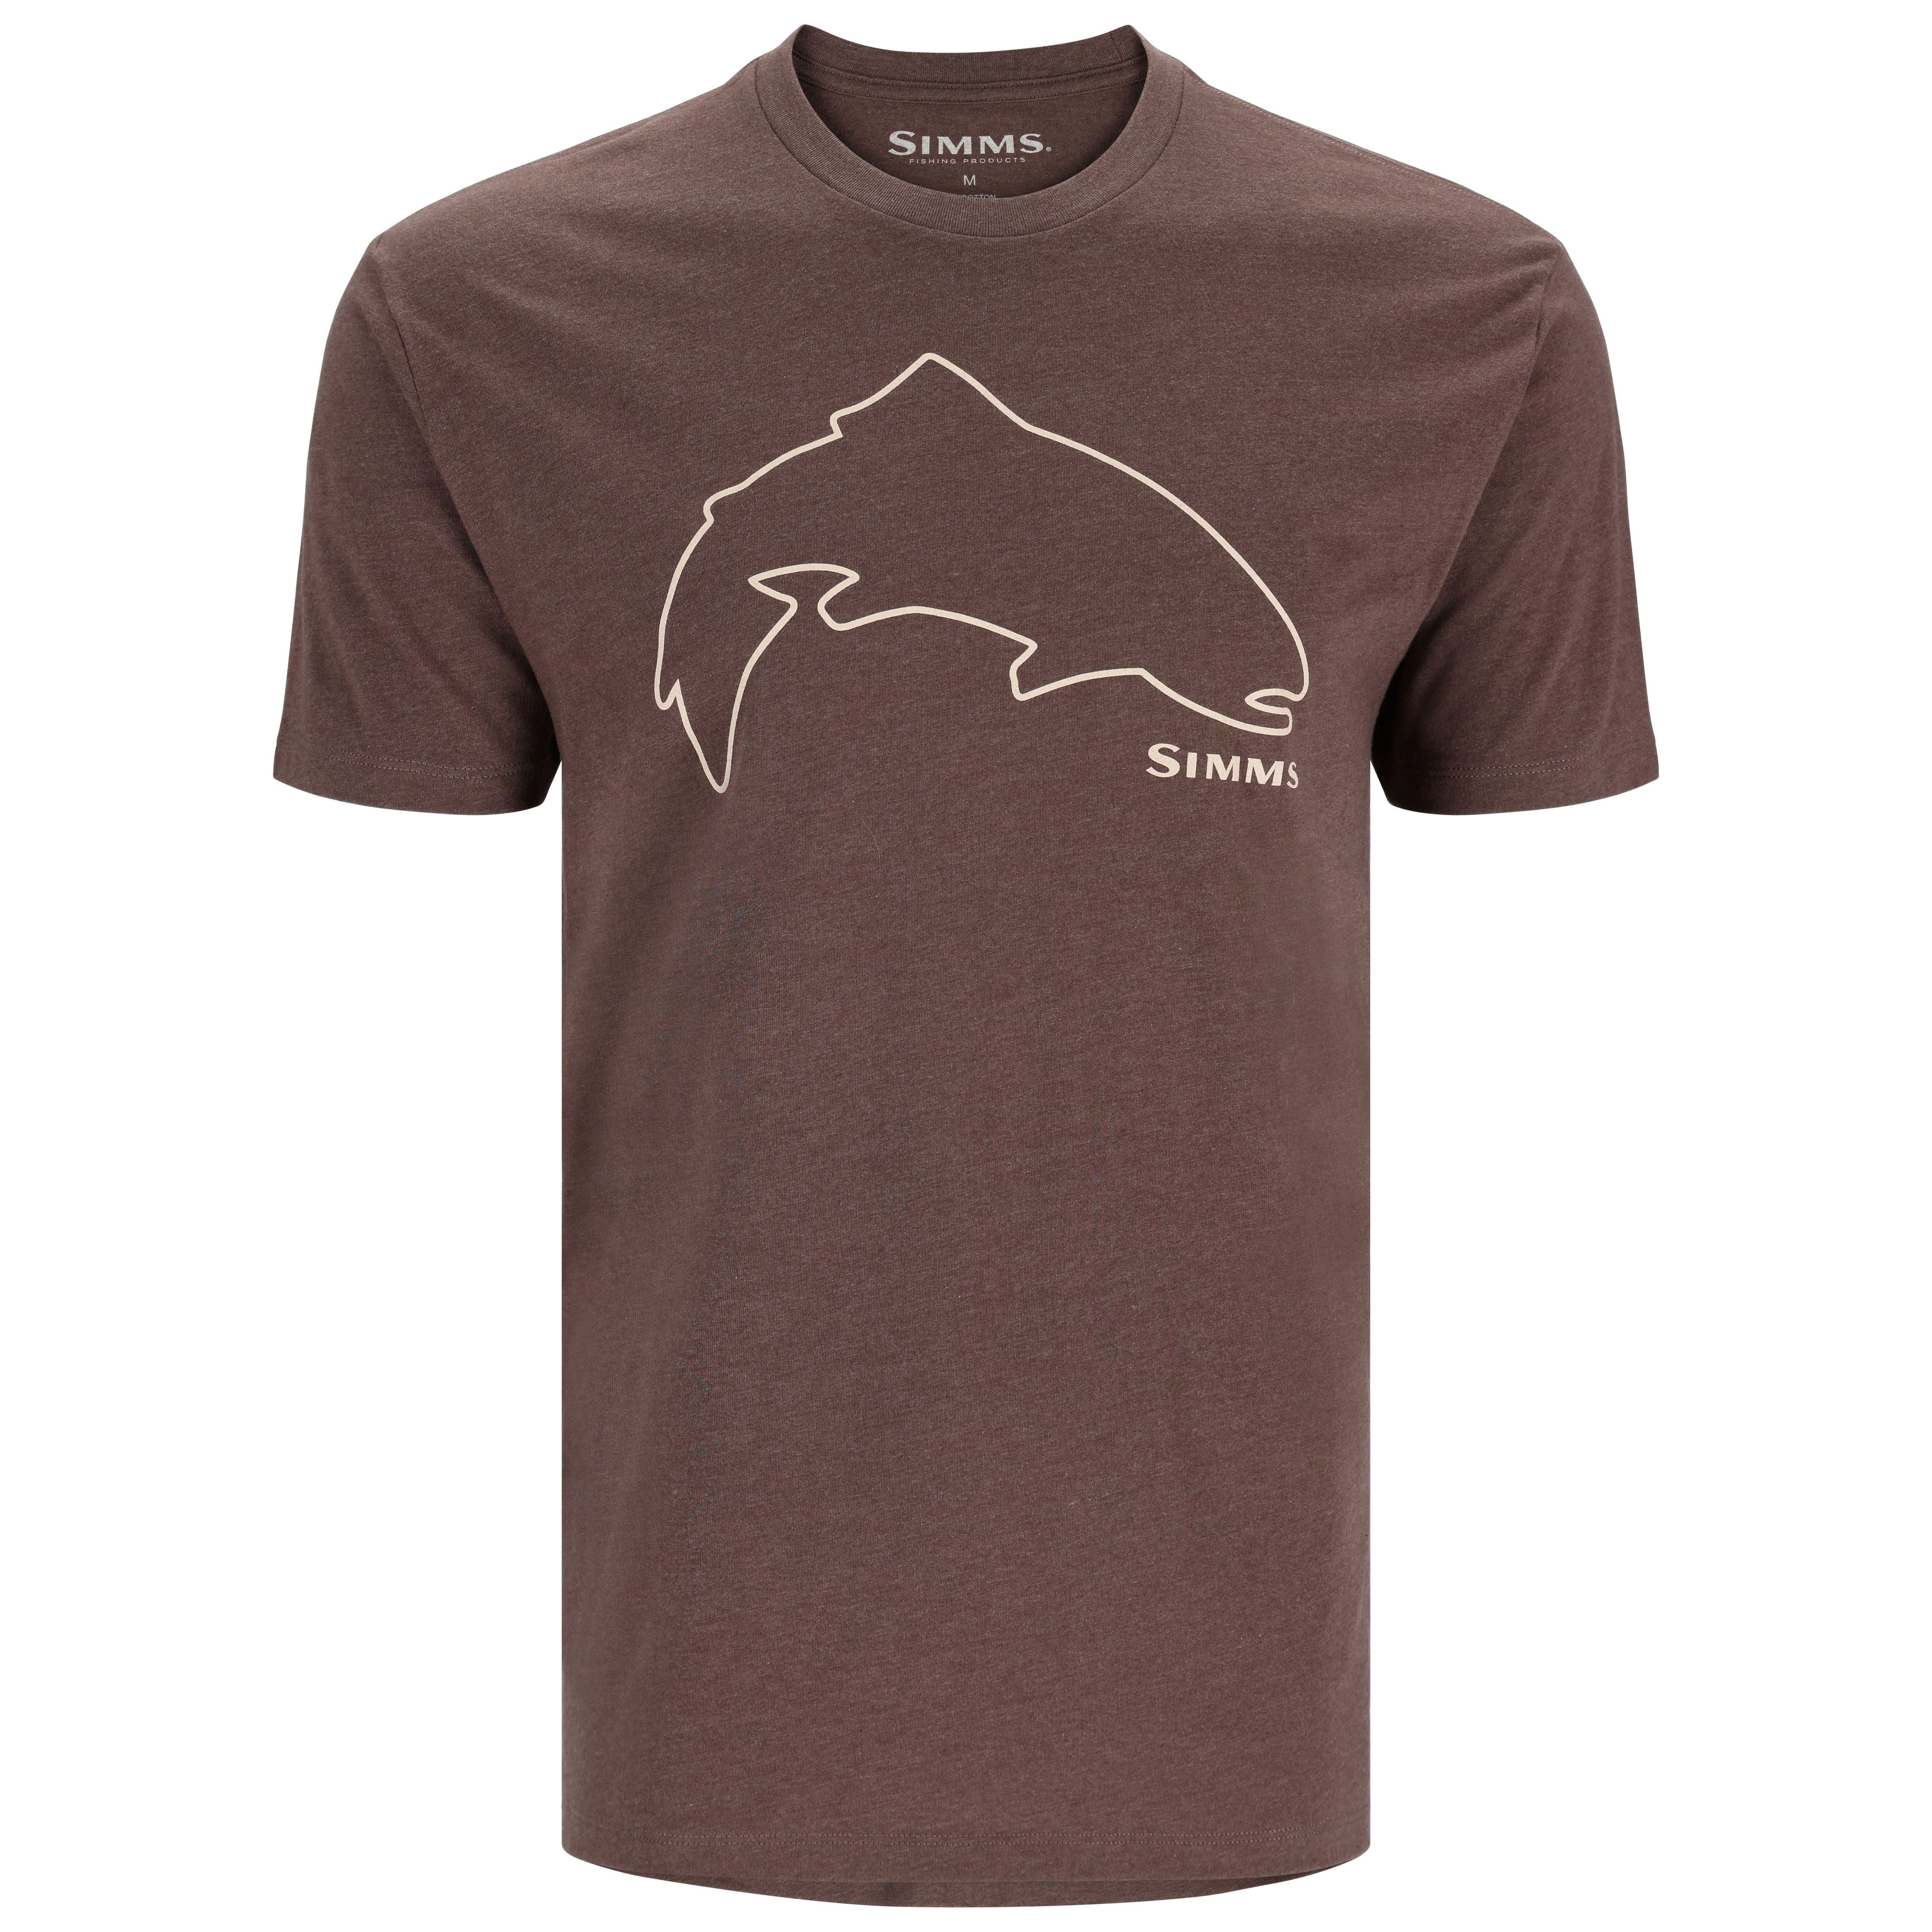 Simms Trout Outline T-Shirt Brown Heather 01